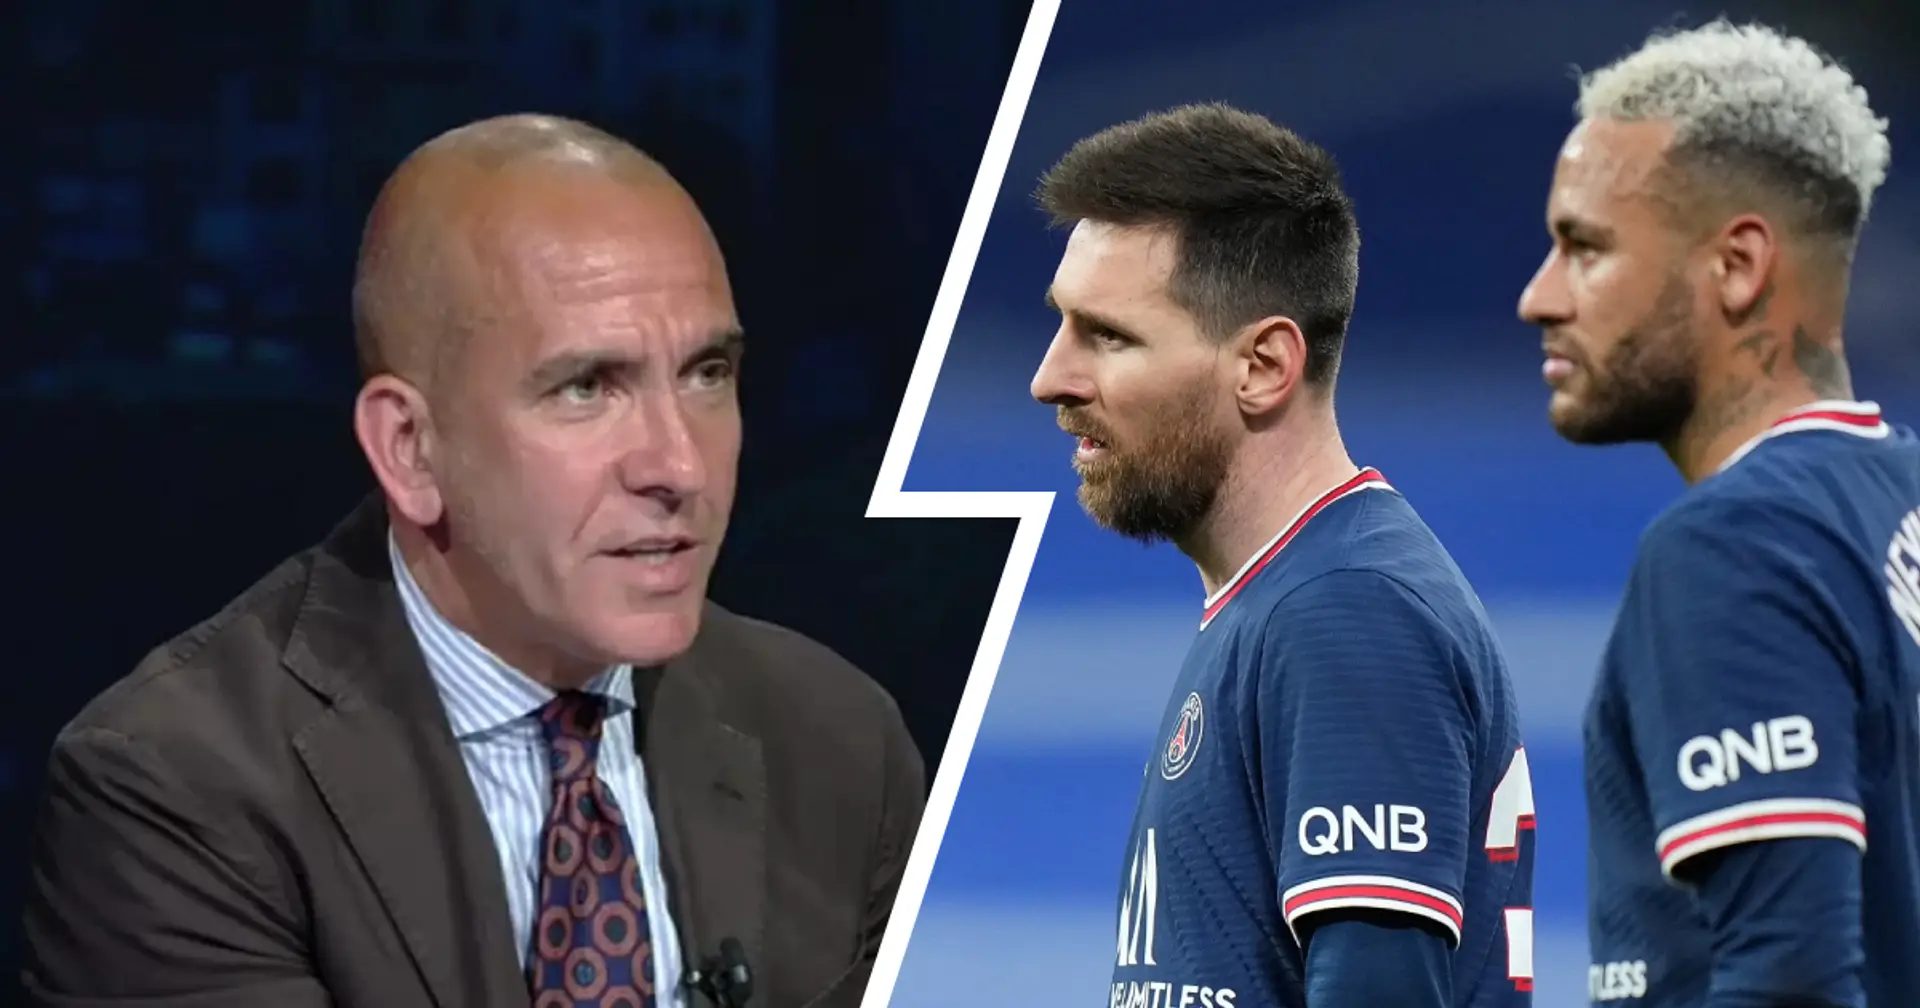 Paolo Di Canio: 'Leo Messi has shown the limitations of his personality. Neymar is even worse'